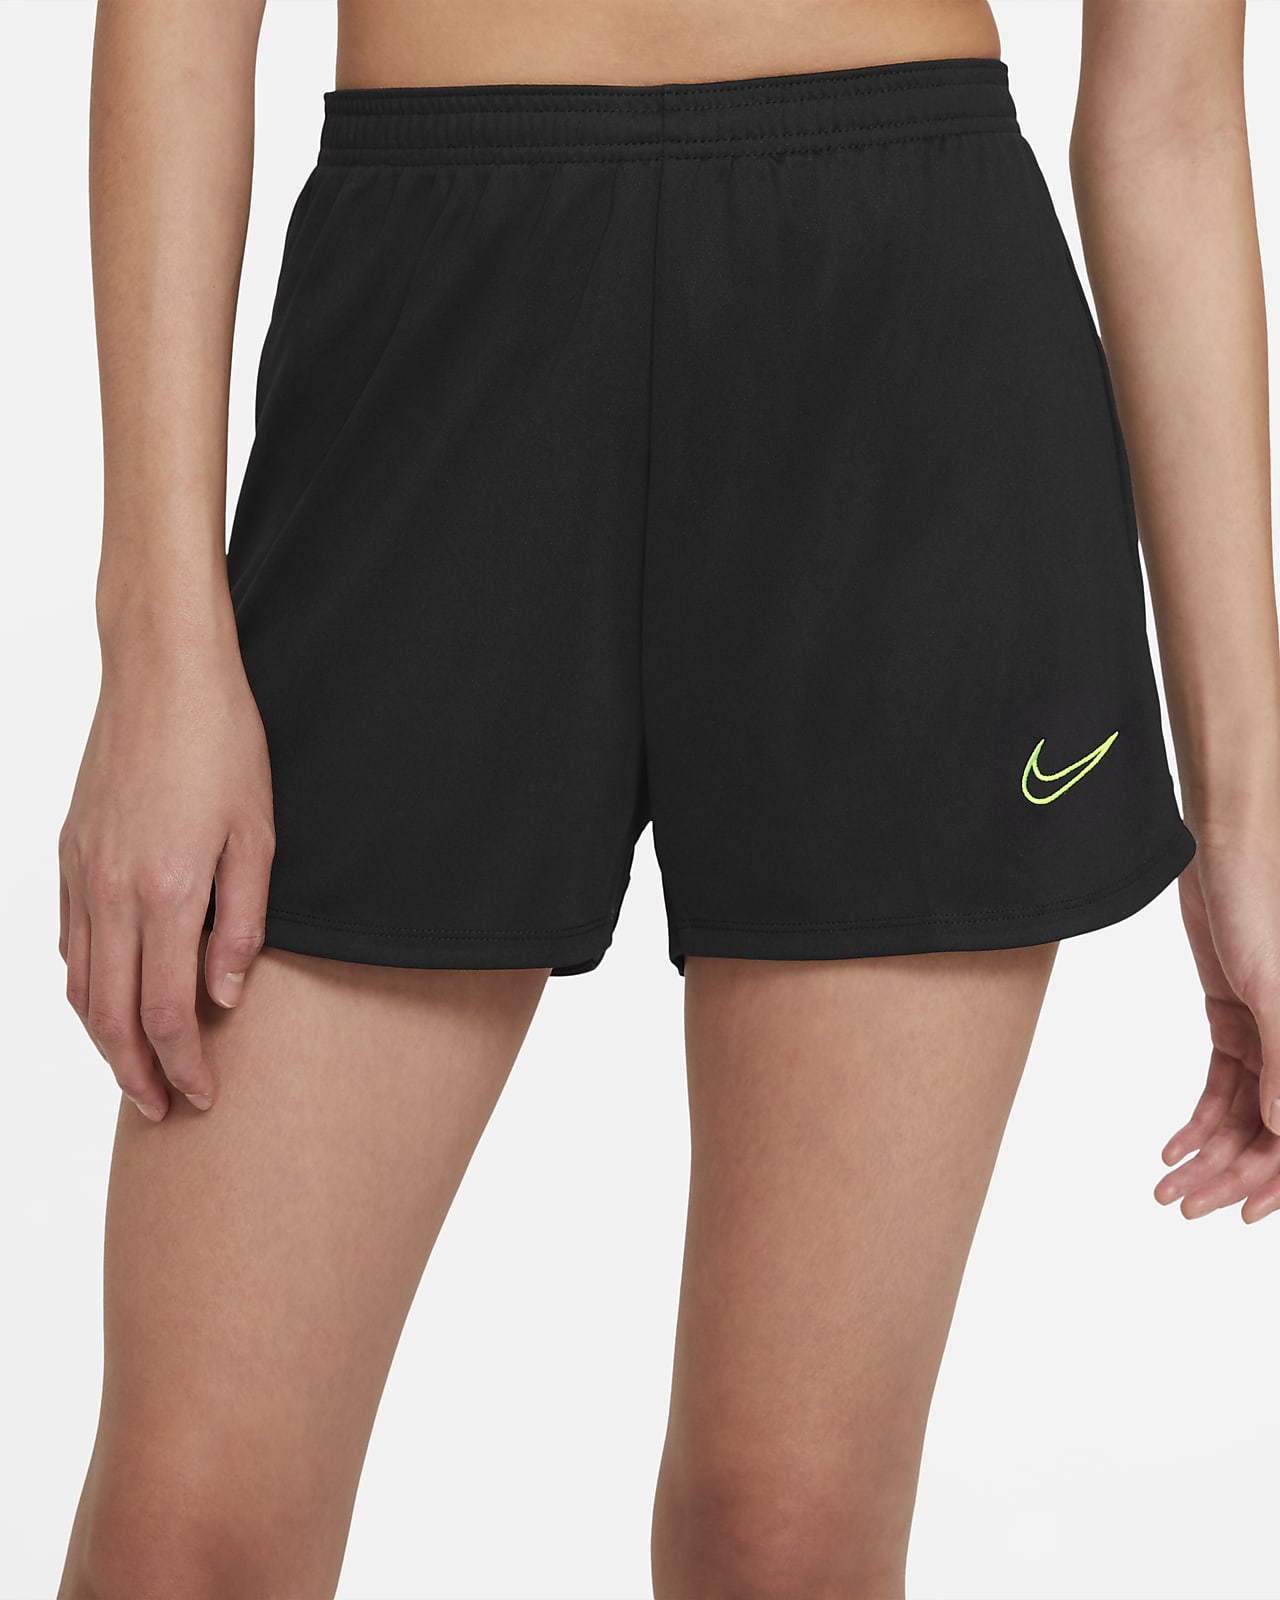 5 Day Nike 4 knit workout shorts juniors for Weight Loss